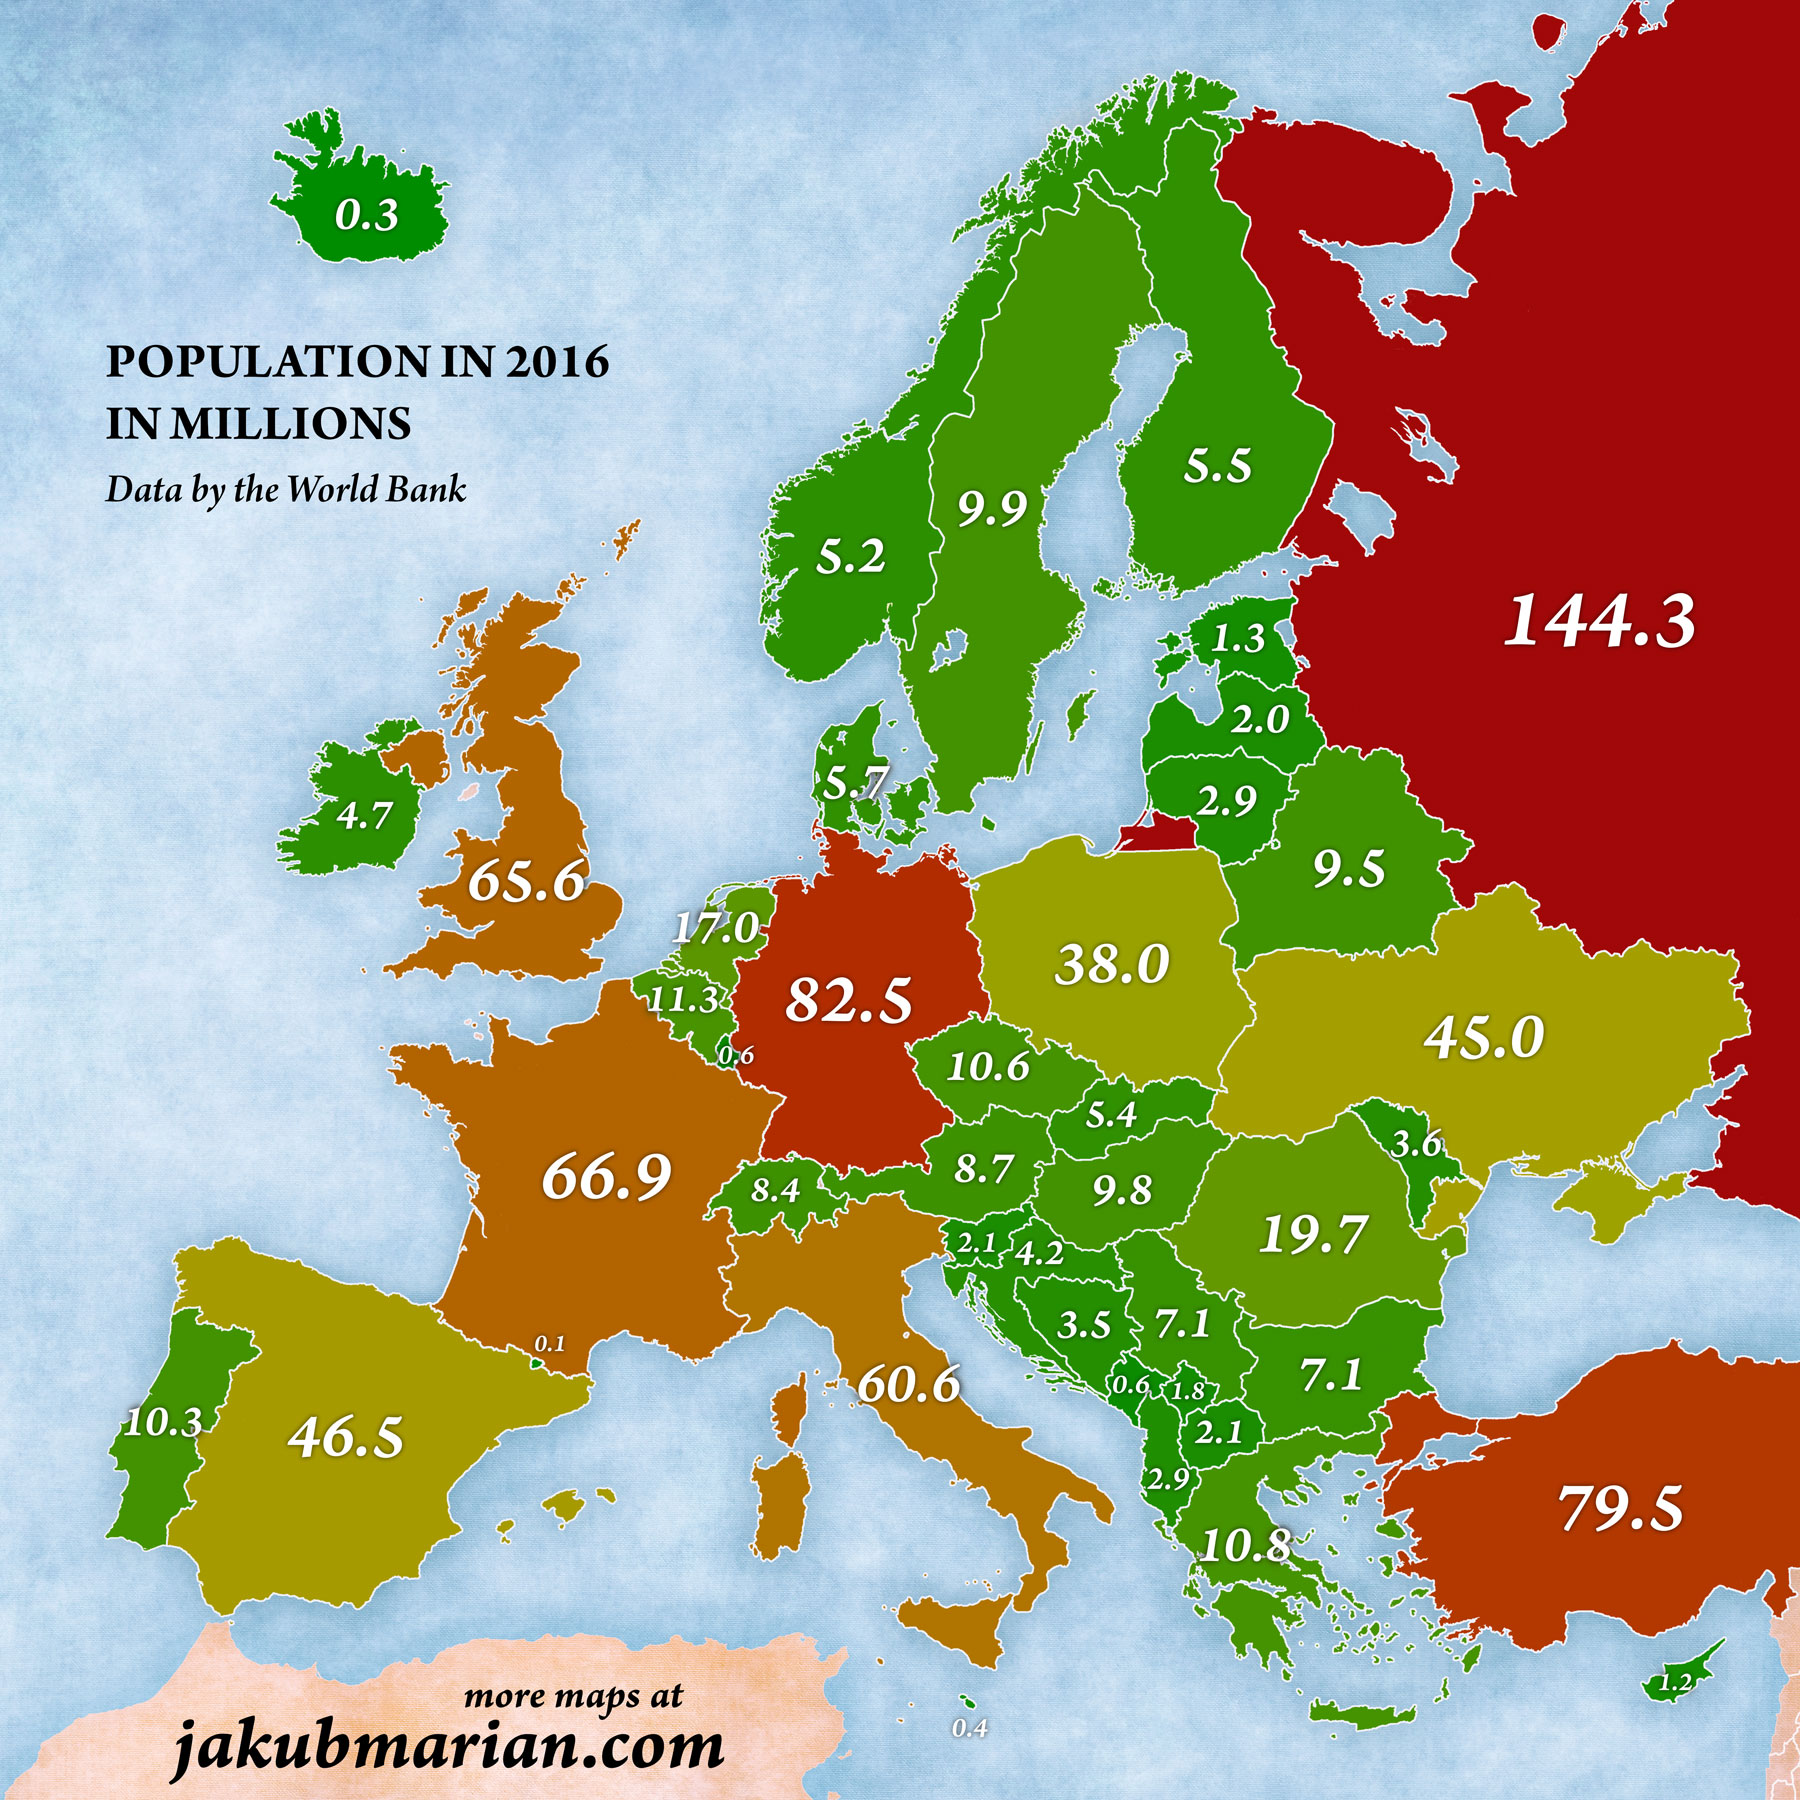 Population of European countries